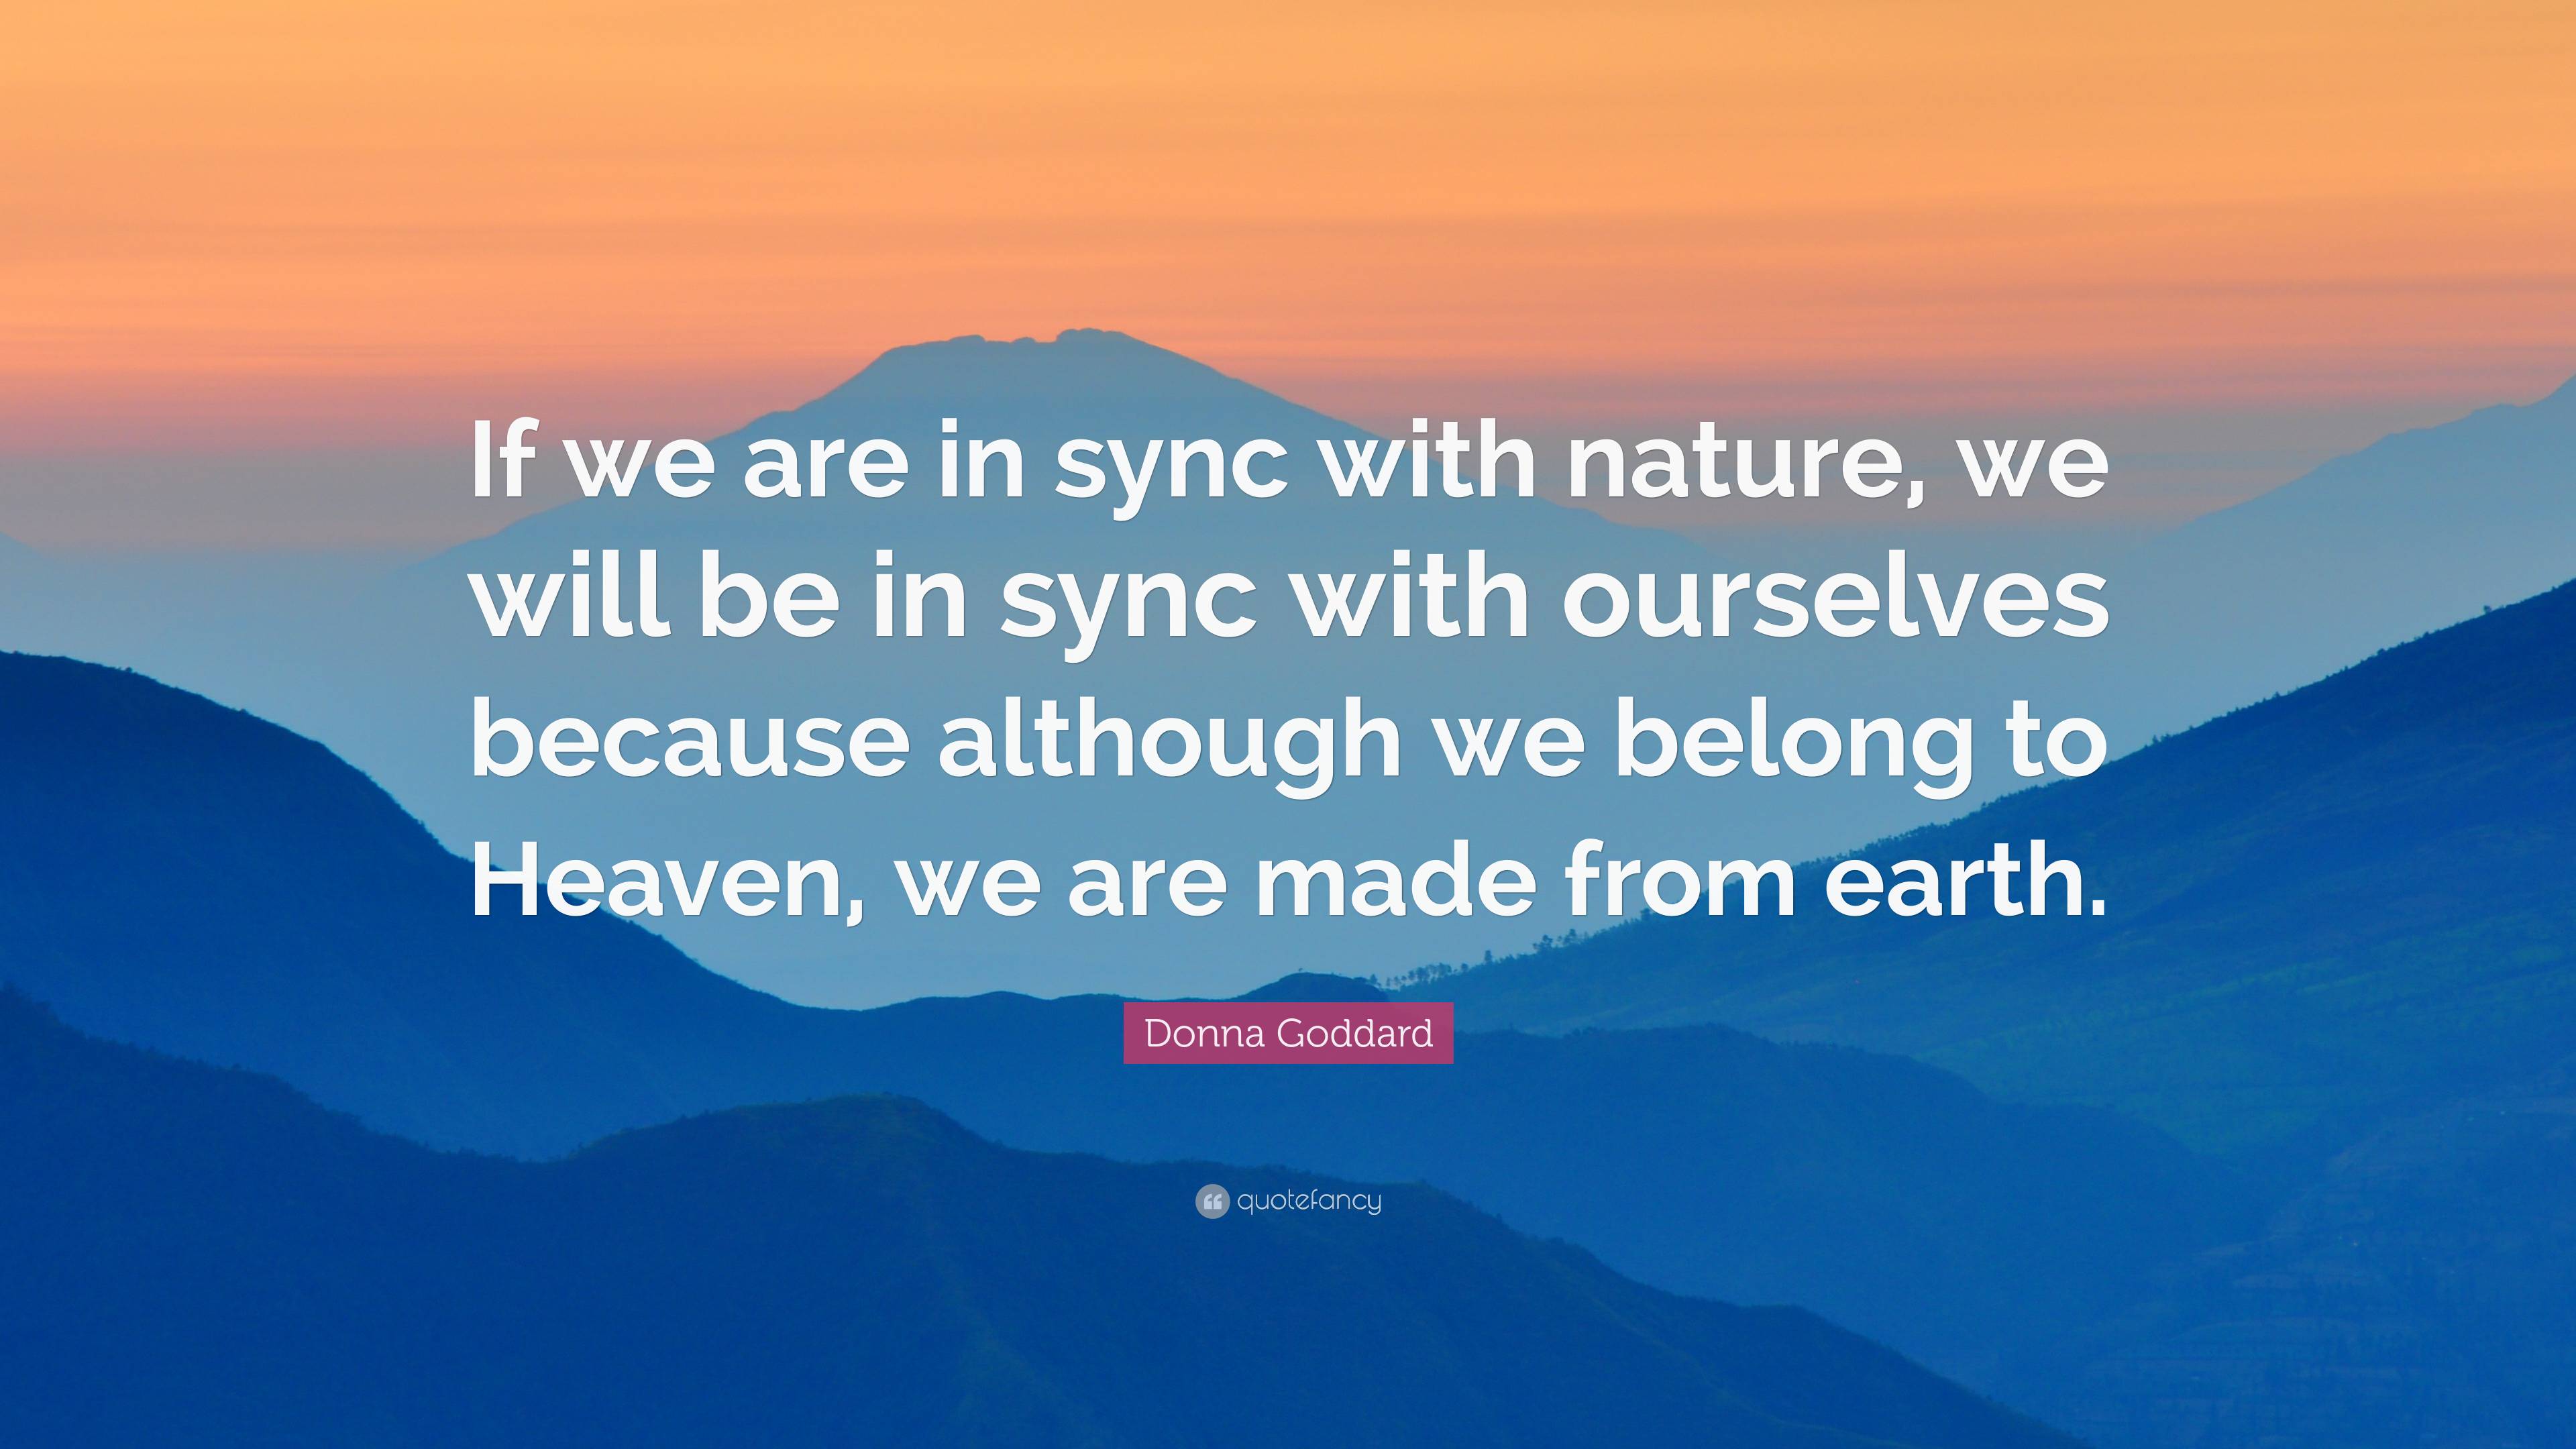 Donna Goddard Quote: “If we are in sync with nature, we will be in sync ...